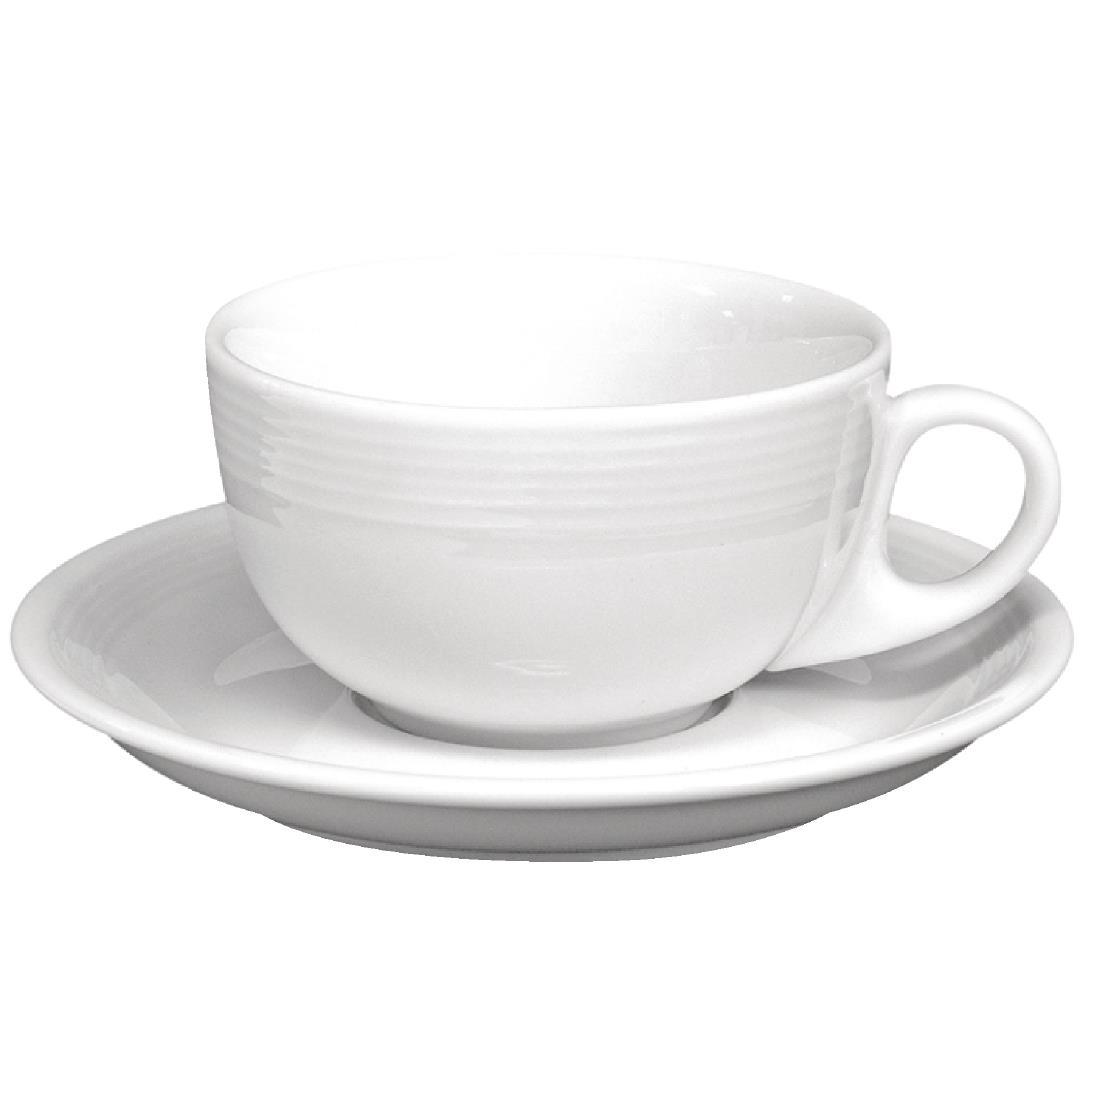 Olympia Linear Cappuccino Cups 206ml (Pack of 12) - U086  - 3